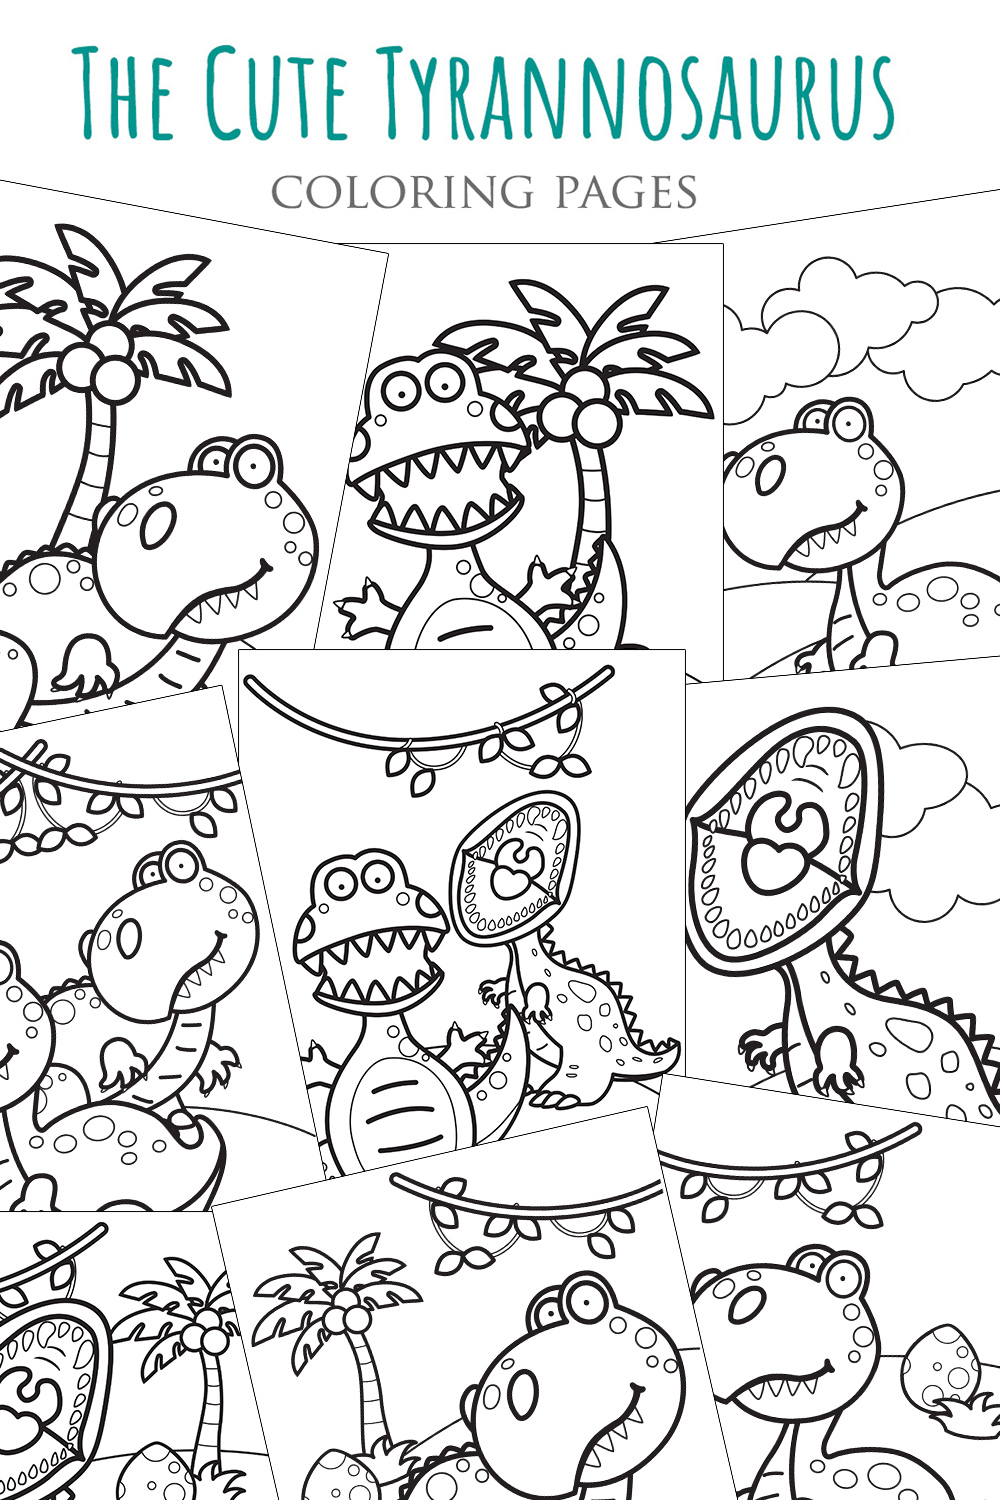 Cute and Funny Dinosaur Tryannosaurus Trex Animal Ancient Cartoon Coloring School or Holiday Activity for Kids and Adult pinterest preview image.